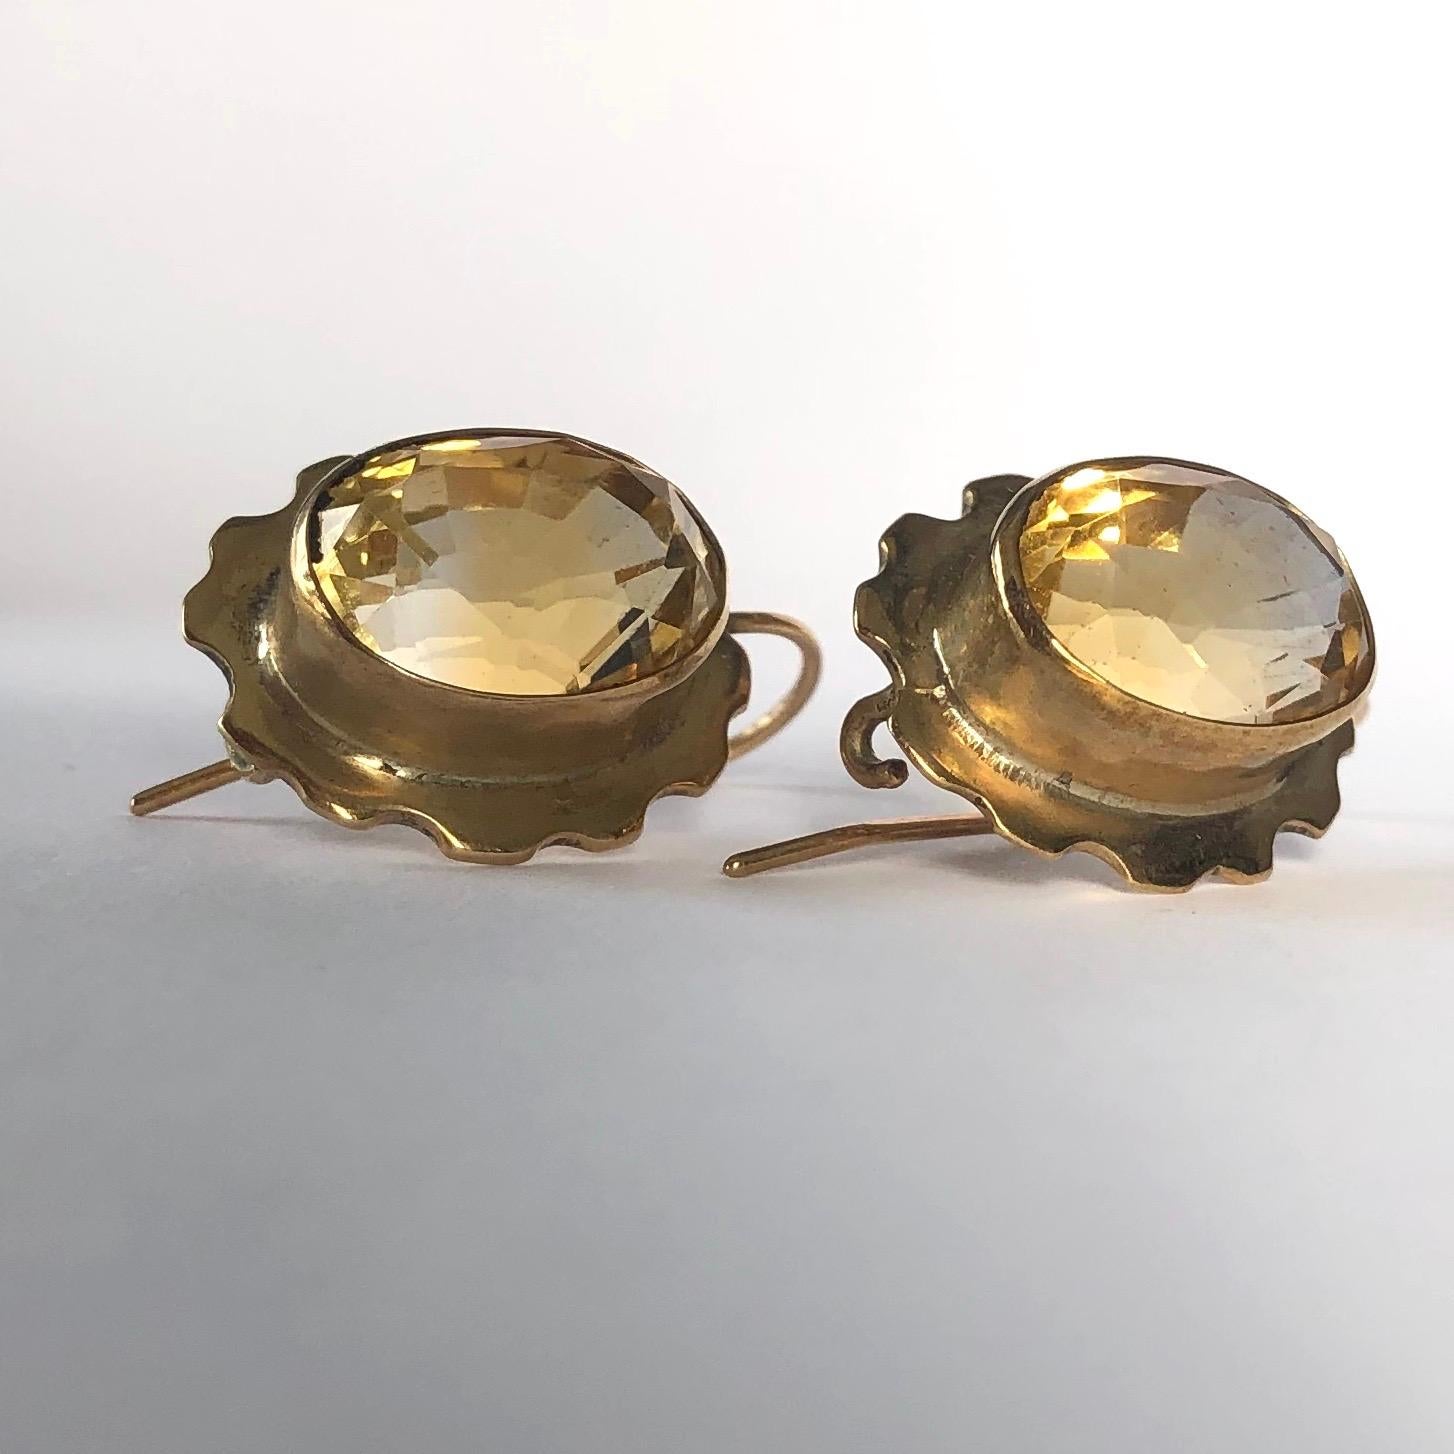 The citrine stones that are set in this glossy 9ct gold are a wonderful yellow colour. The frame around the stones has scalloped detail and they are worn using a shepherds hook. 

Drop From Ear: 22mm
Stone Dimensions: 13x9mm

Weight: 5.99g